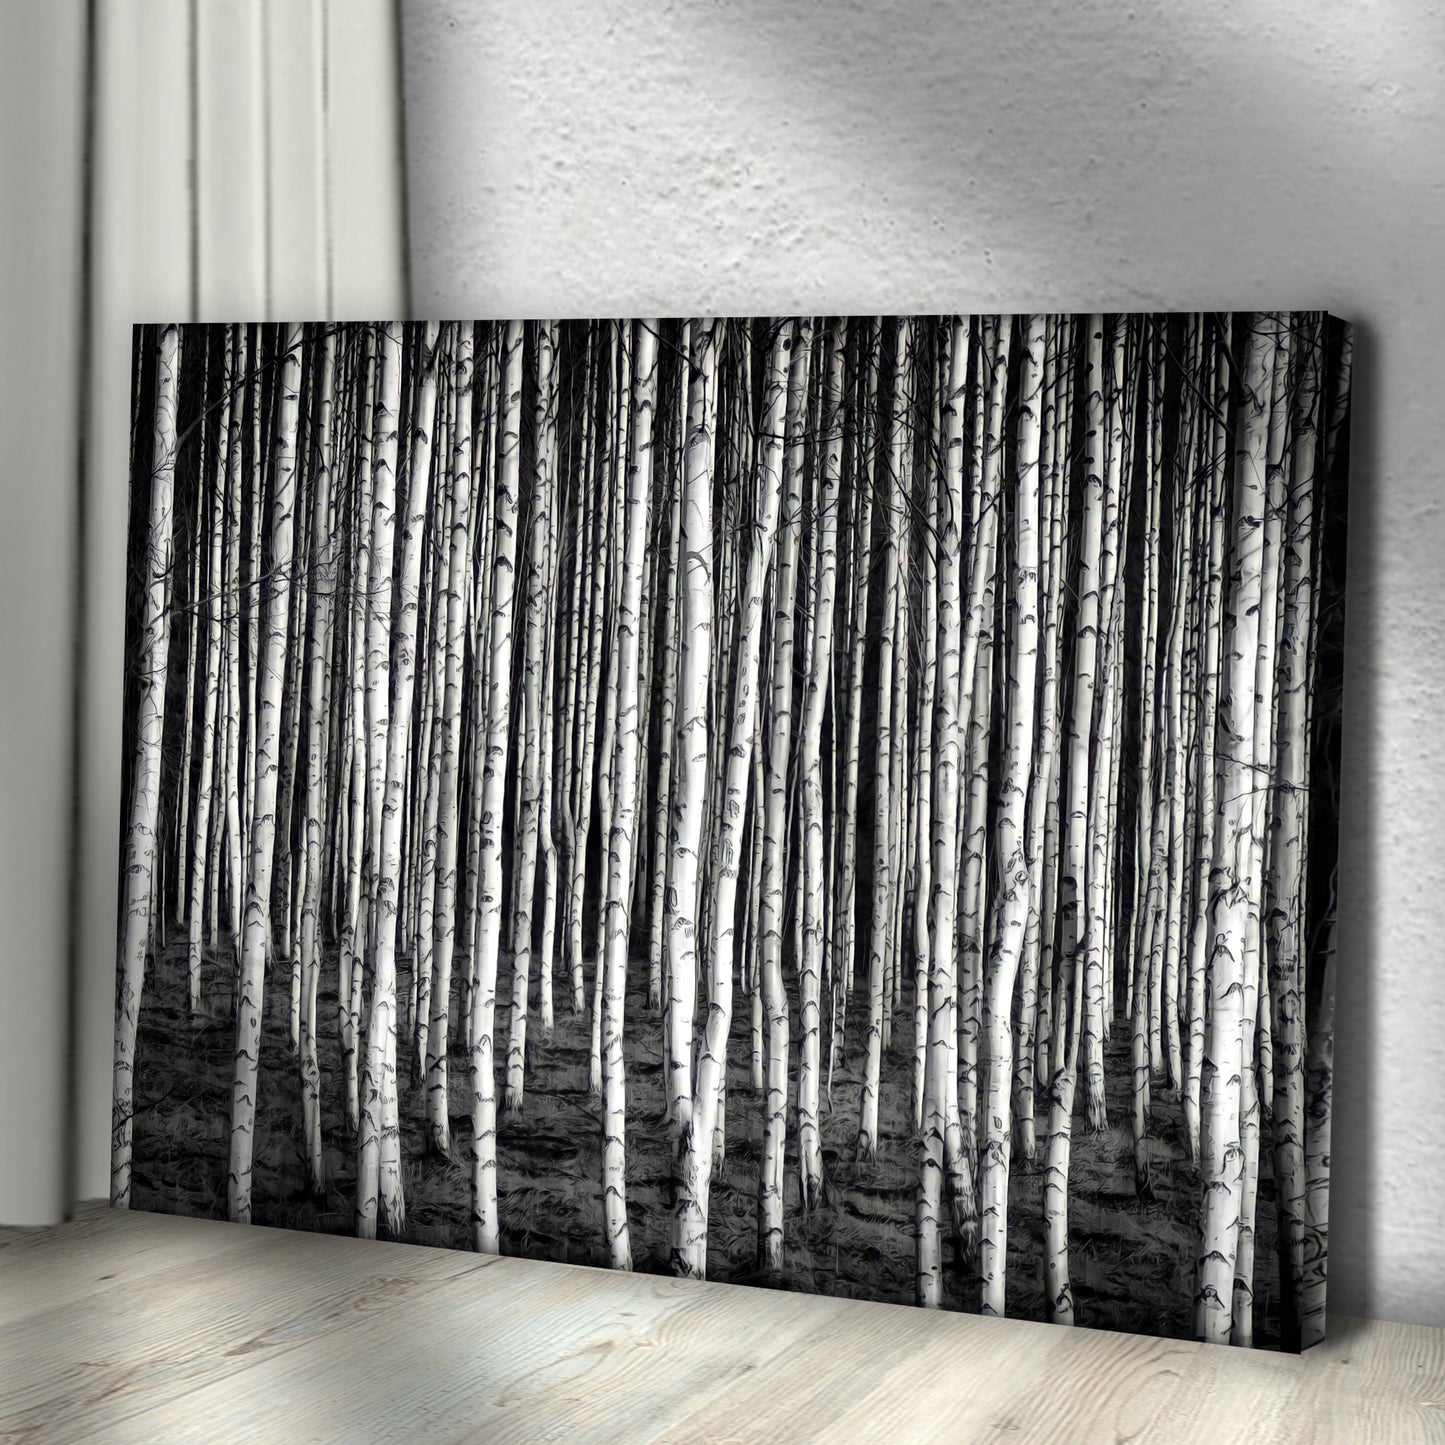 Monochrome Birch Trees Canvas Wall Art Style 1 - Image by Tailored Canvases